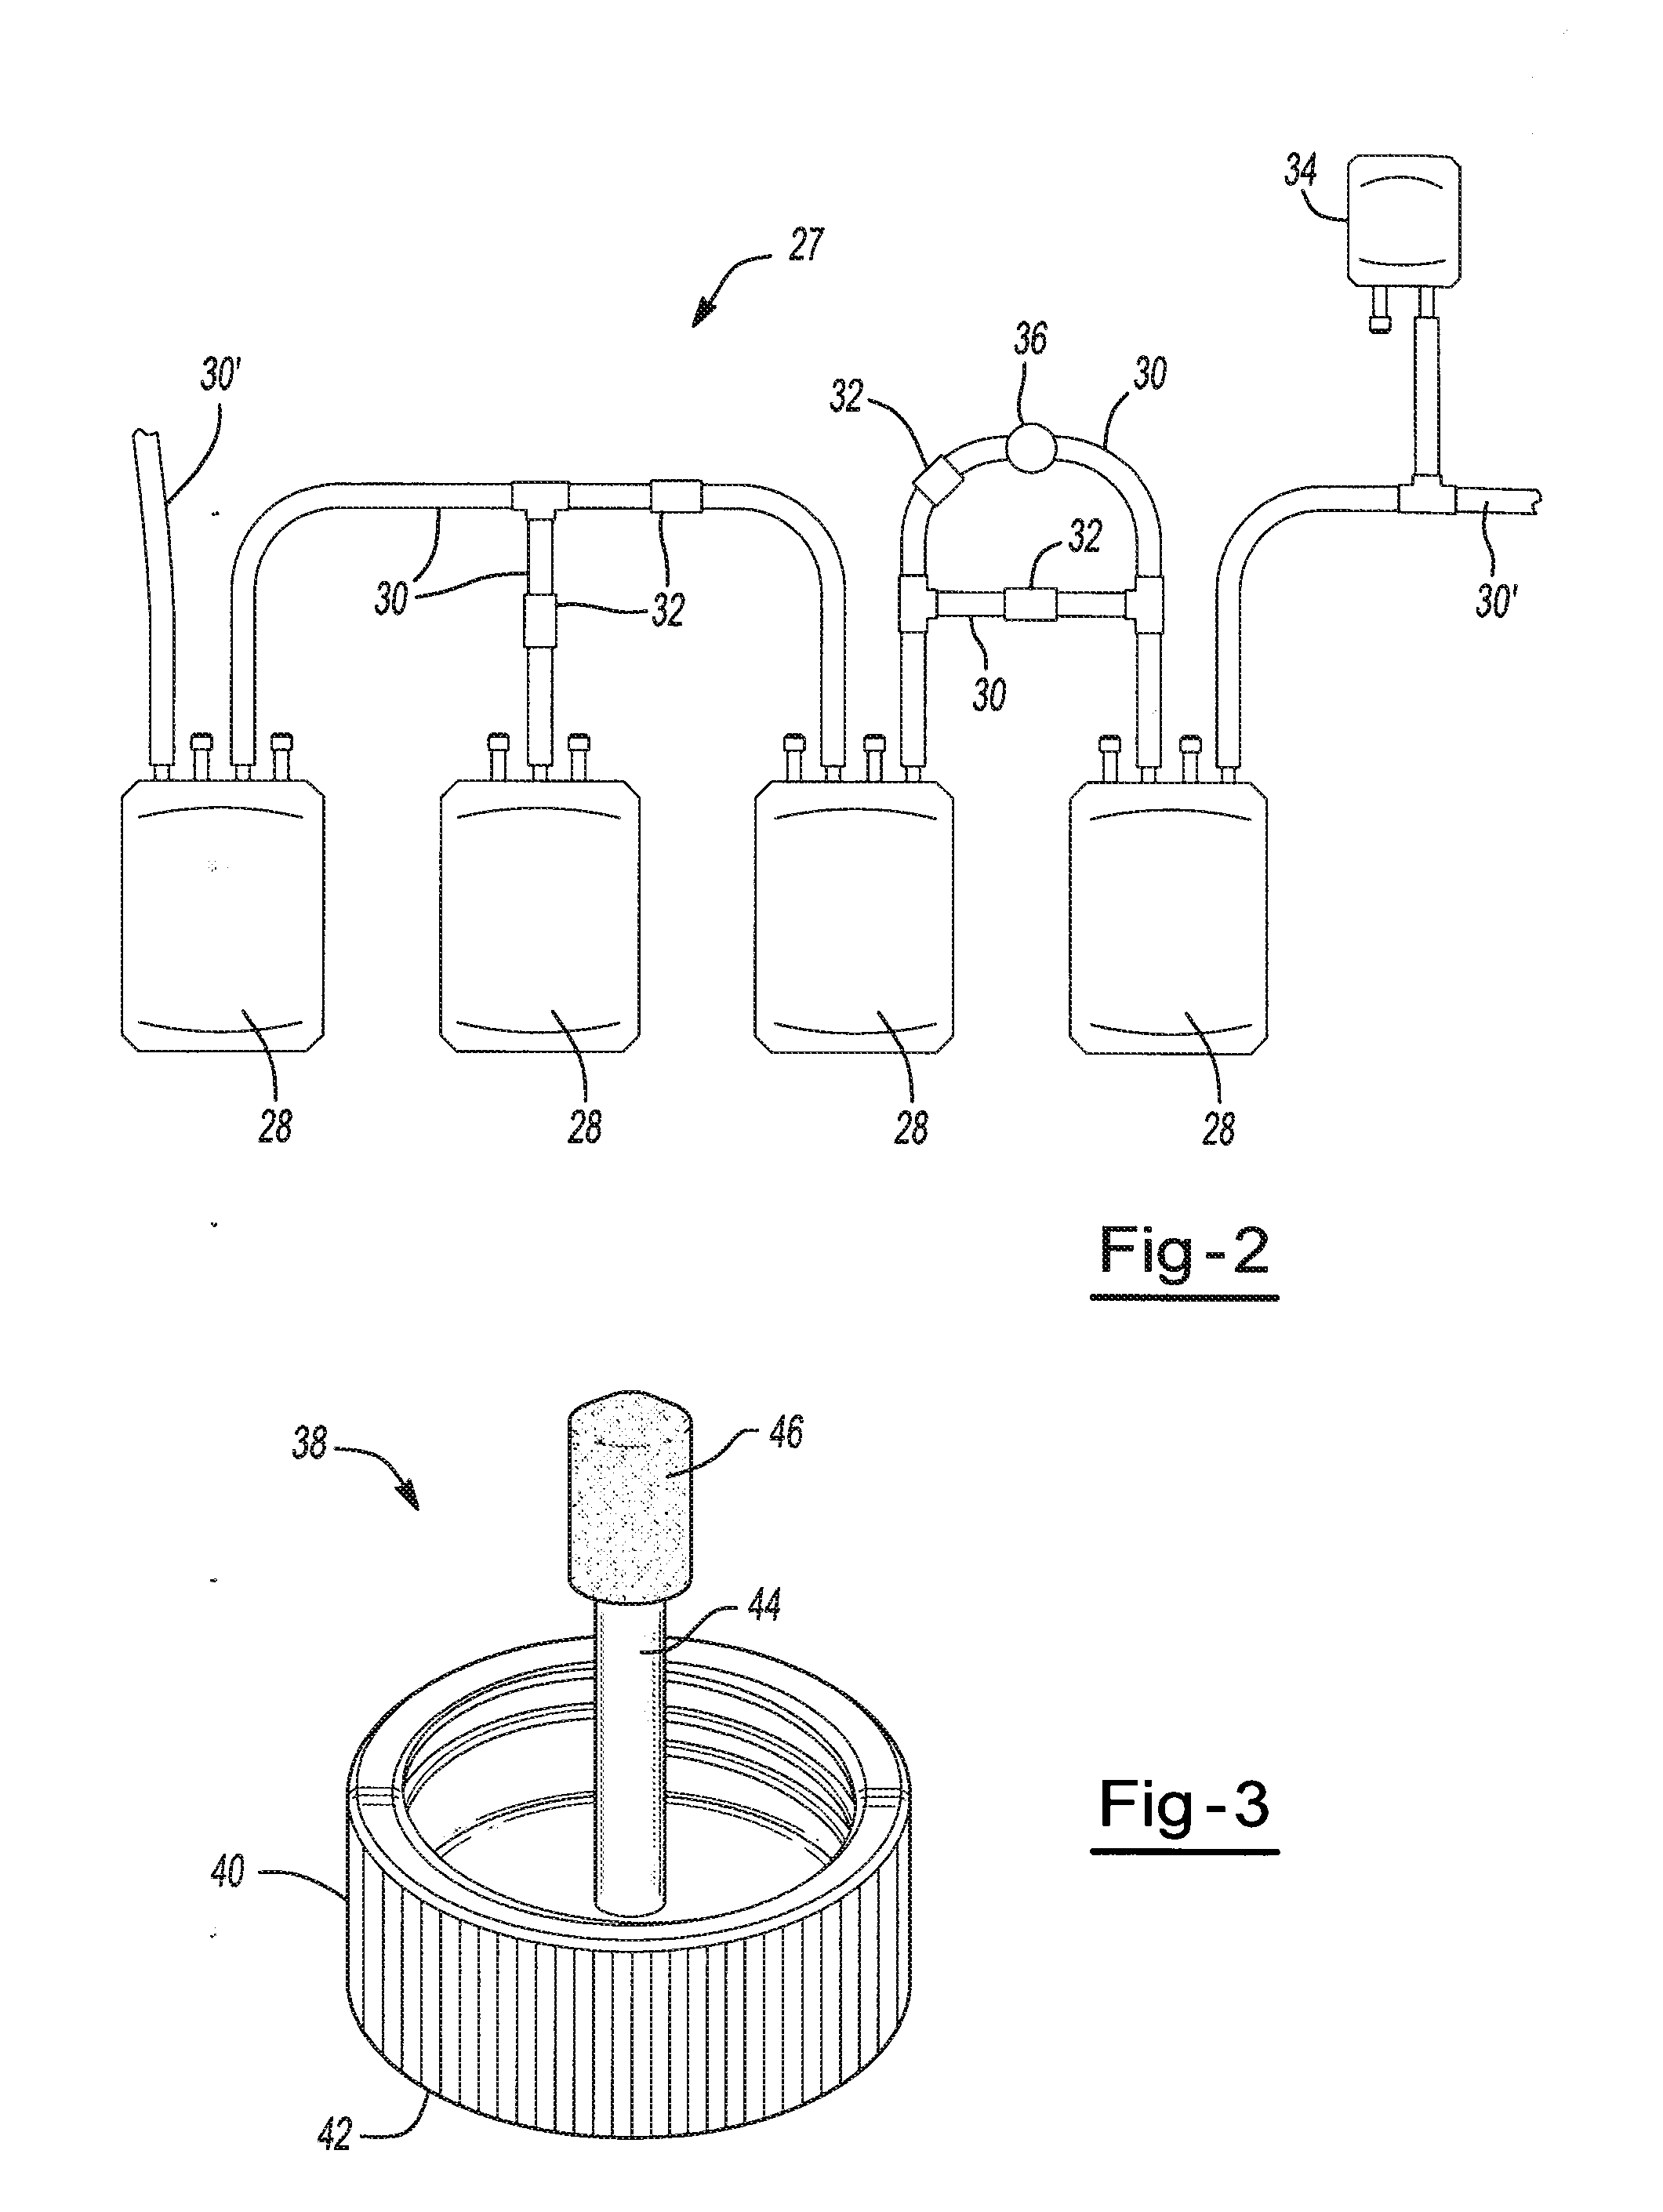 Method for screening blood using a preservative that may be in a substantially solid state form